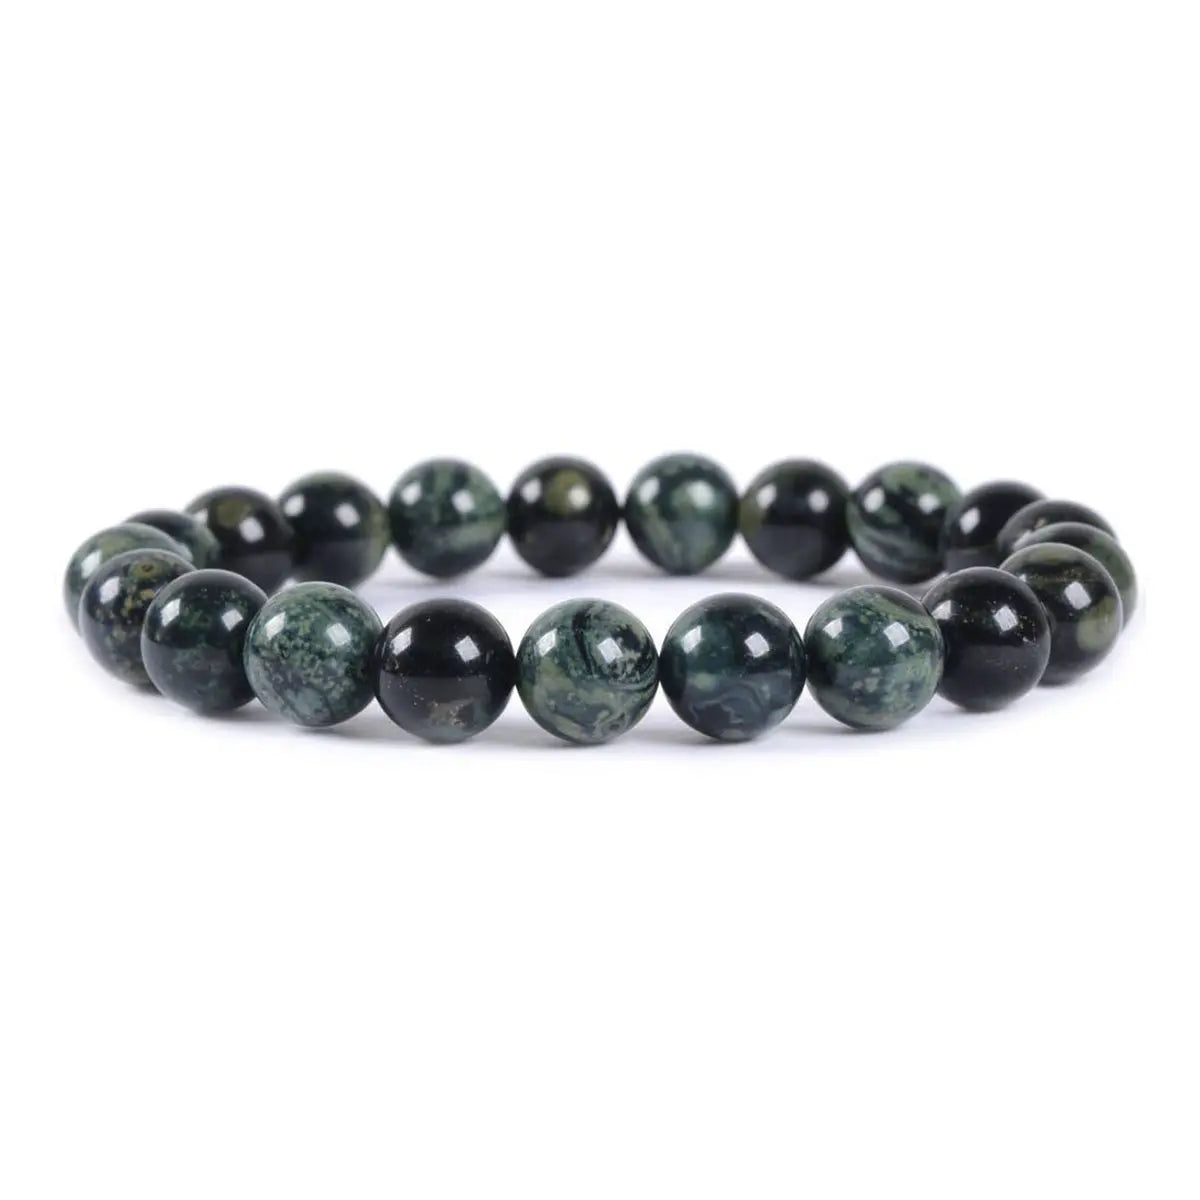 Round Beads Stretch Bracelet 7 Inch Unisex - 47 Different Crystals Healing Crystal Home